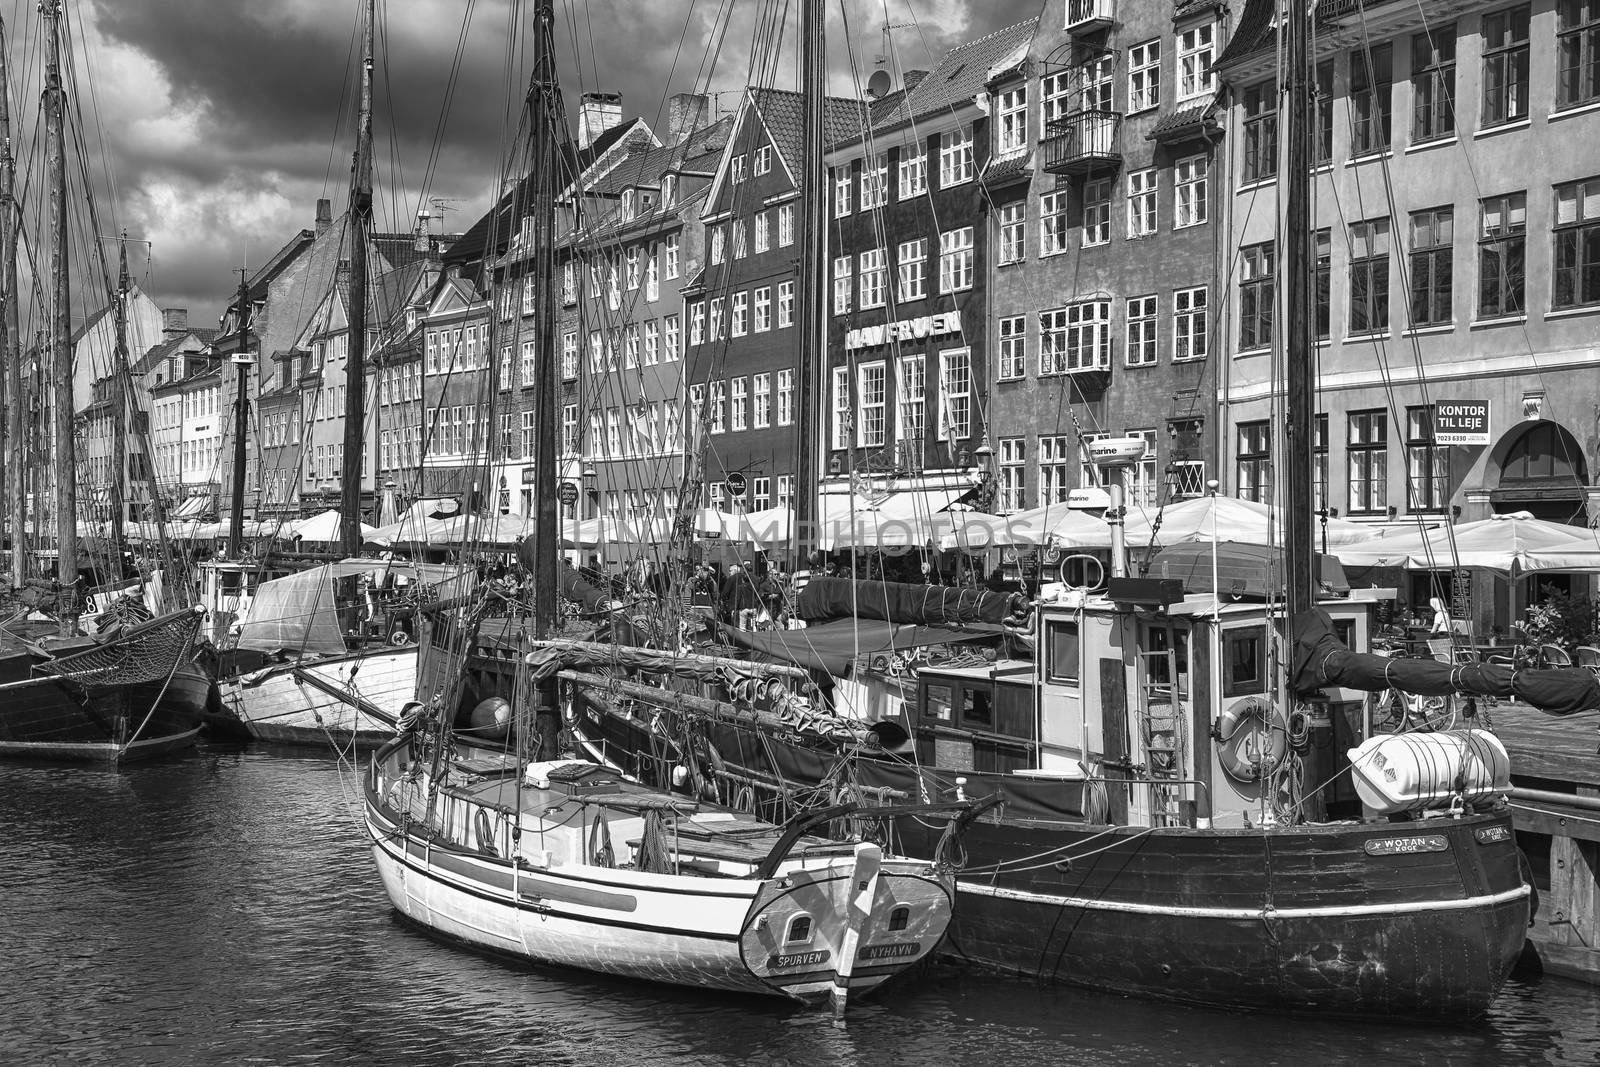 COPENHAGEN, DENMARK - AUGUST 14, 2016: Black and white photo, boats in the docks Nyhavn, people, and colorful architecture. Nyhavn a 17th century harbour in Copenhagen, Denmark on August 14, 2016.